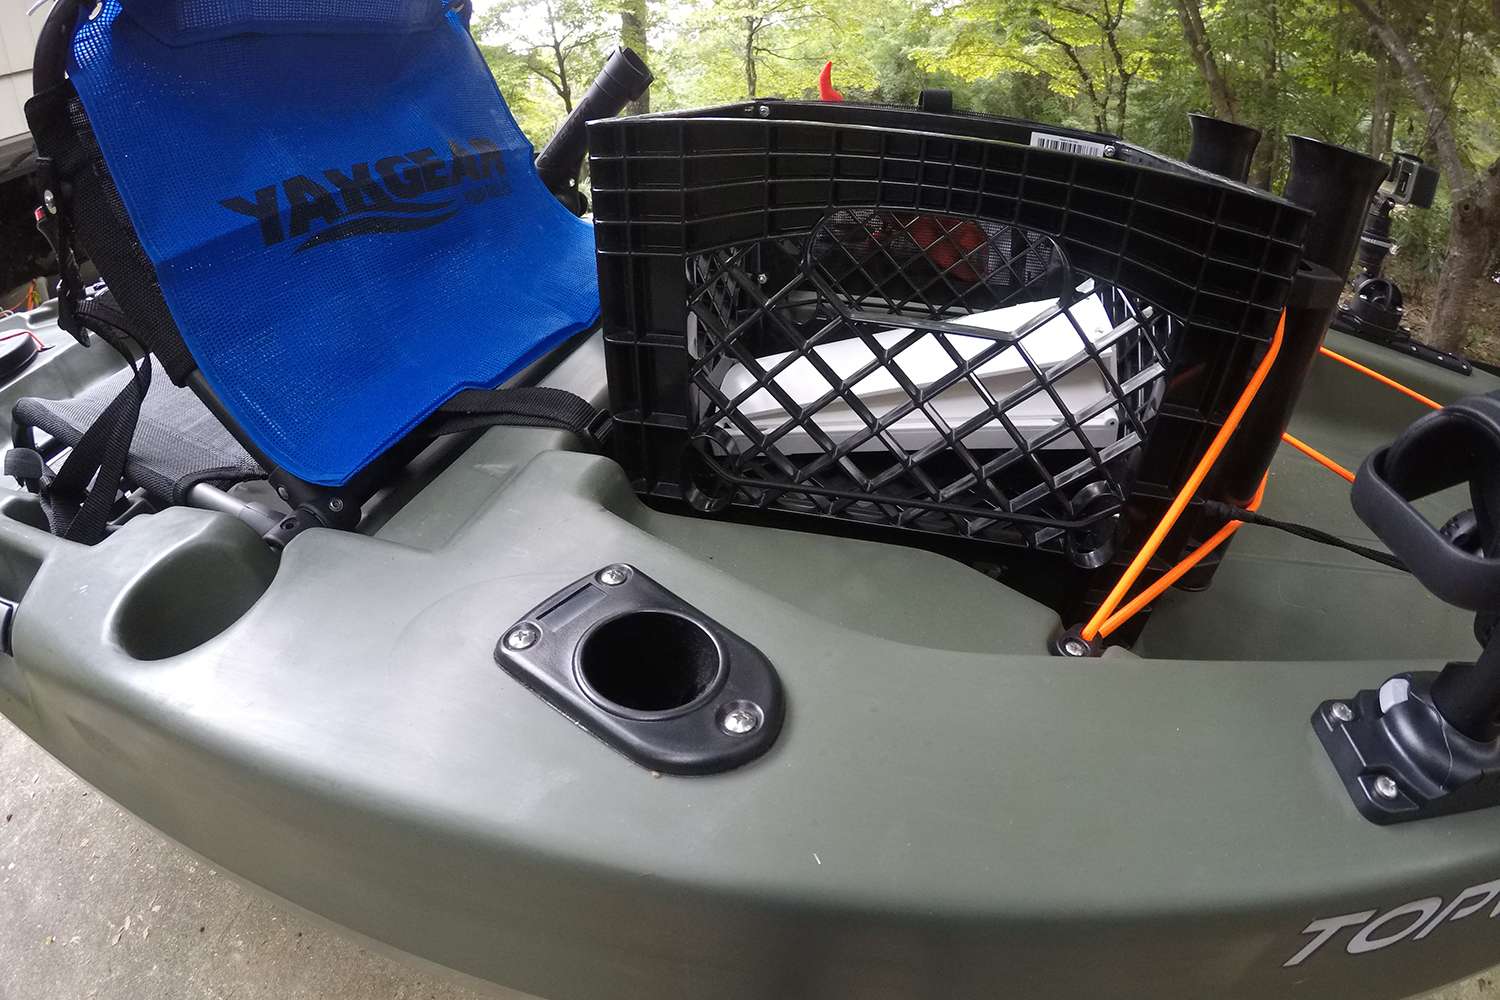 Behind the seat is a YakGear Kayak Angler Kit in Crate. It has rod holders and plenty of room for tackle trays. And whatever else you might need to have along.